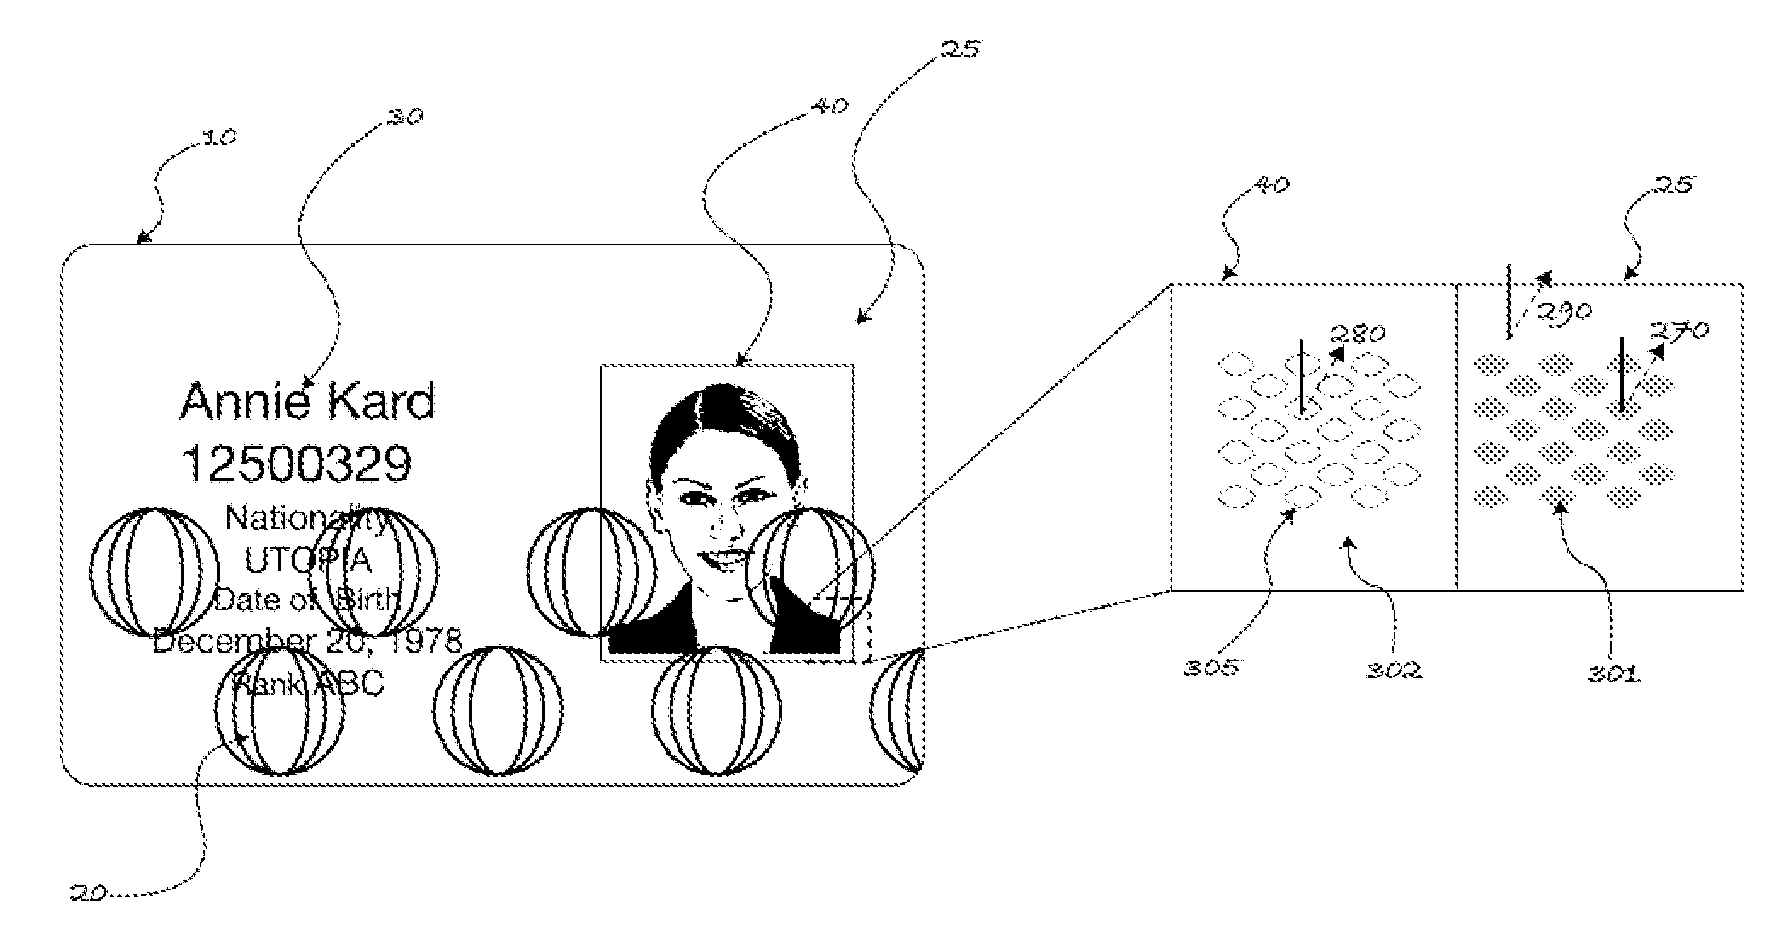 Ovd containing device